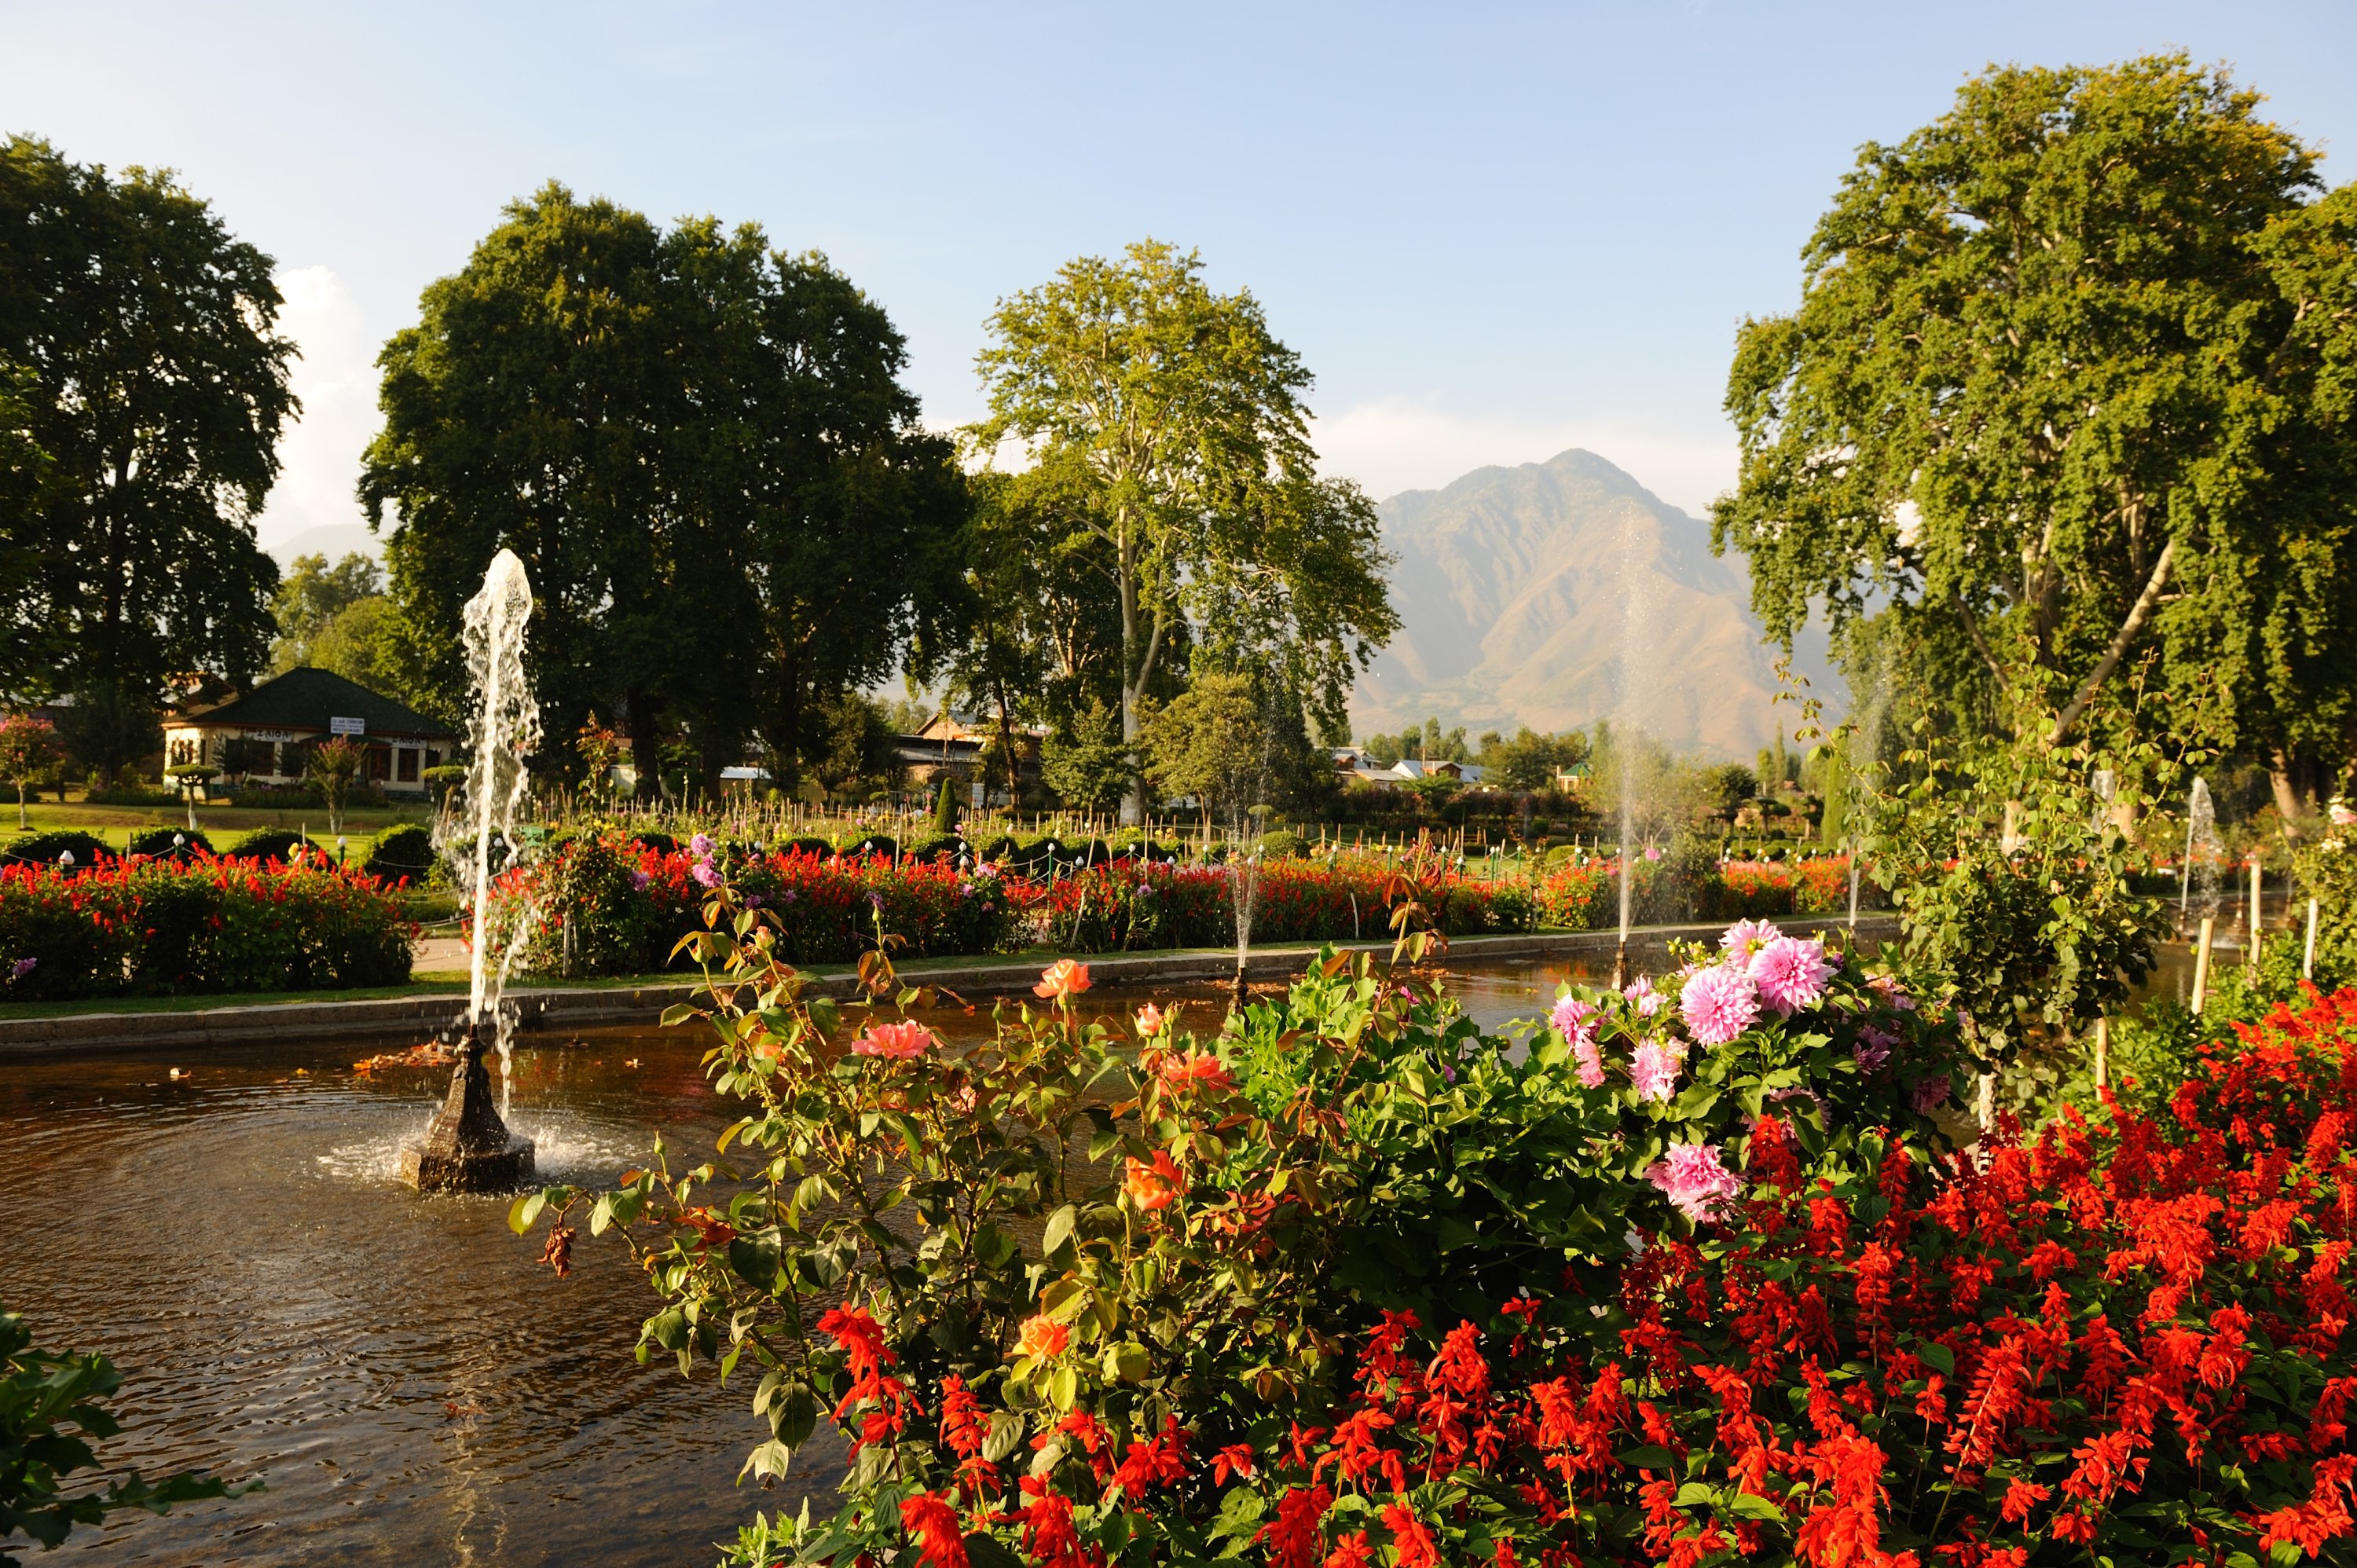  A view from the Mughal Garden of Shalimar Bagh in Srinagar, Kashmir, July 5, 2013. (Getty Images)